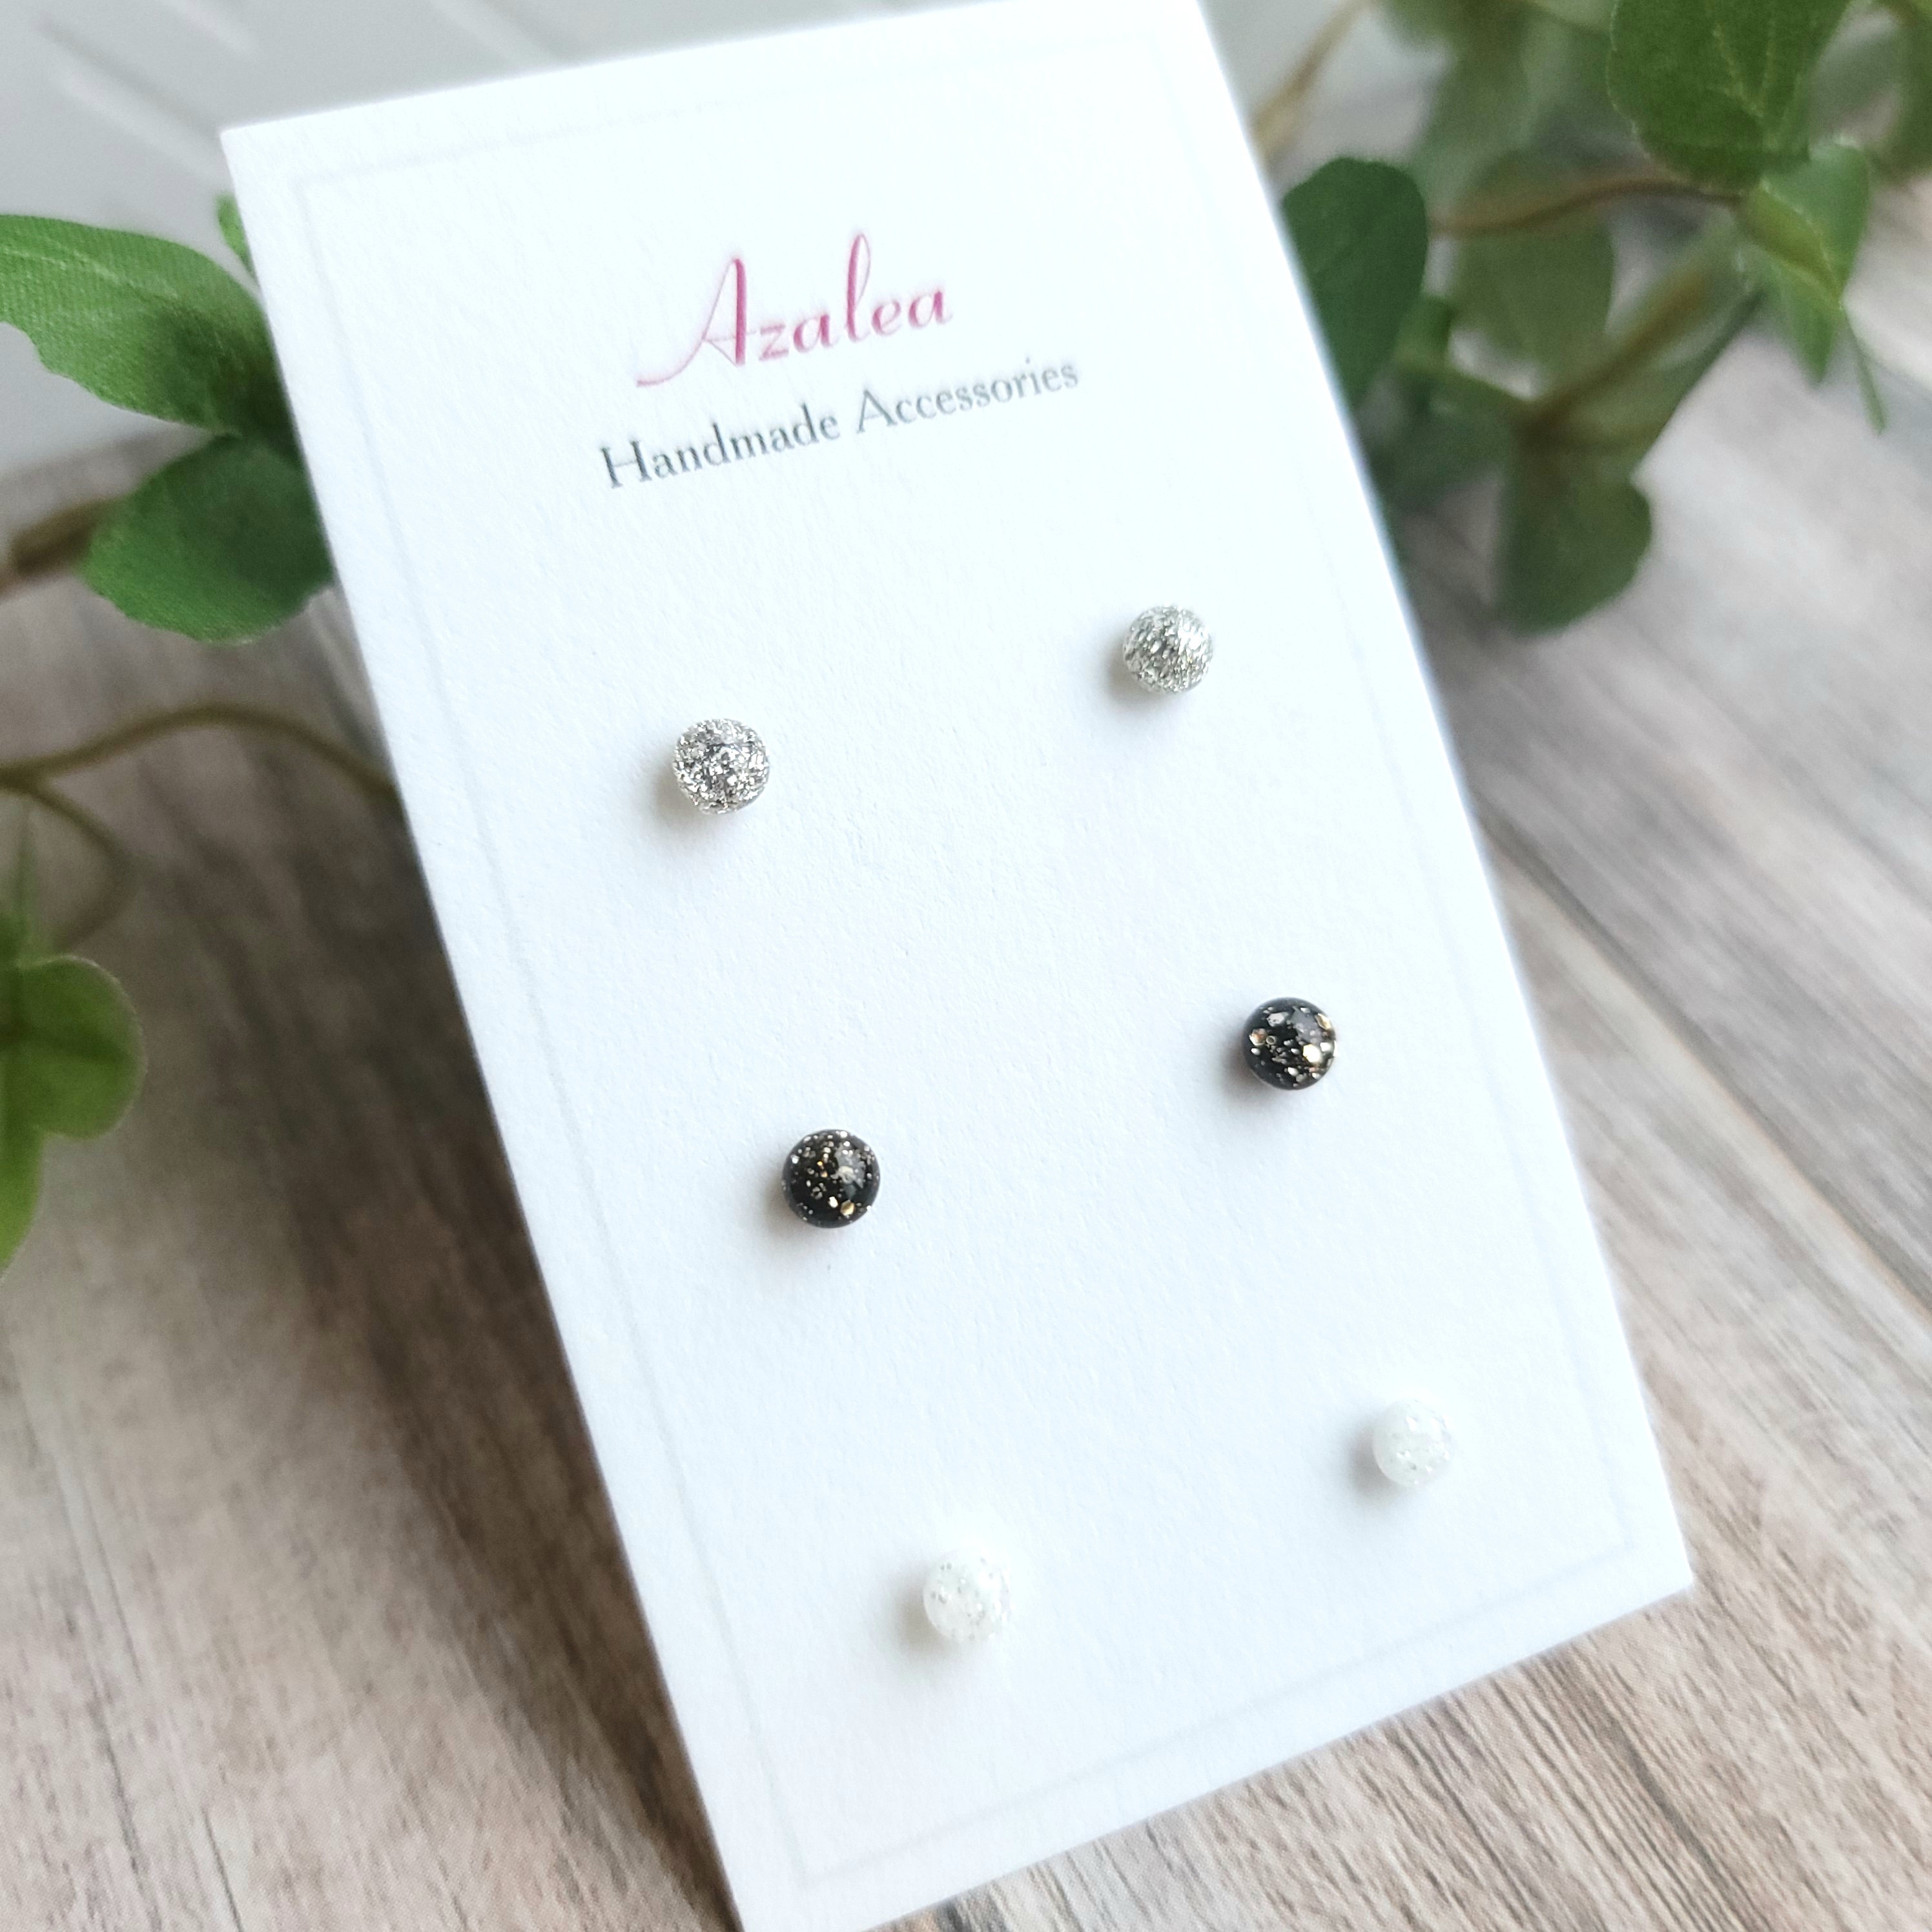 Clear Plastic Stud Earrings. Transparent in Colour Easily Hidden for Work  or School. Acrylic Post With Silicone Back. Small Clear Earring 